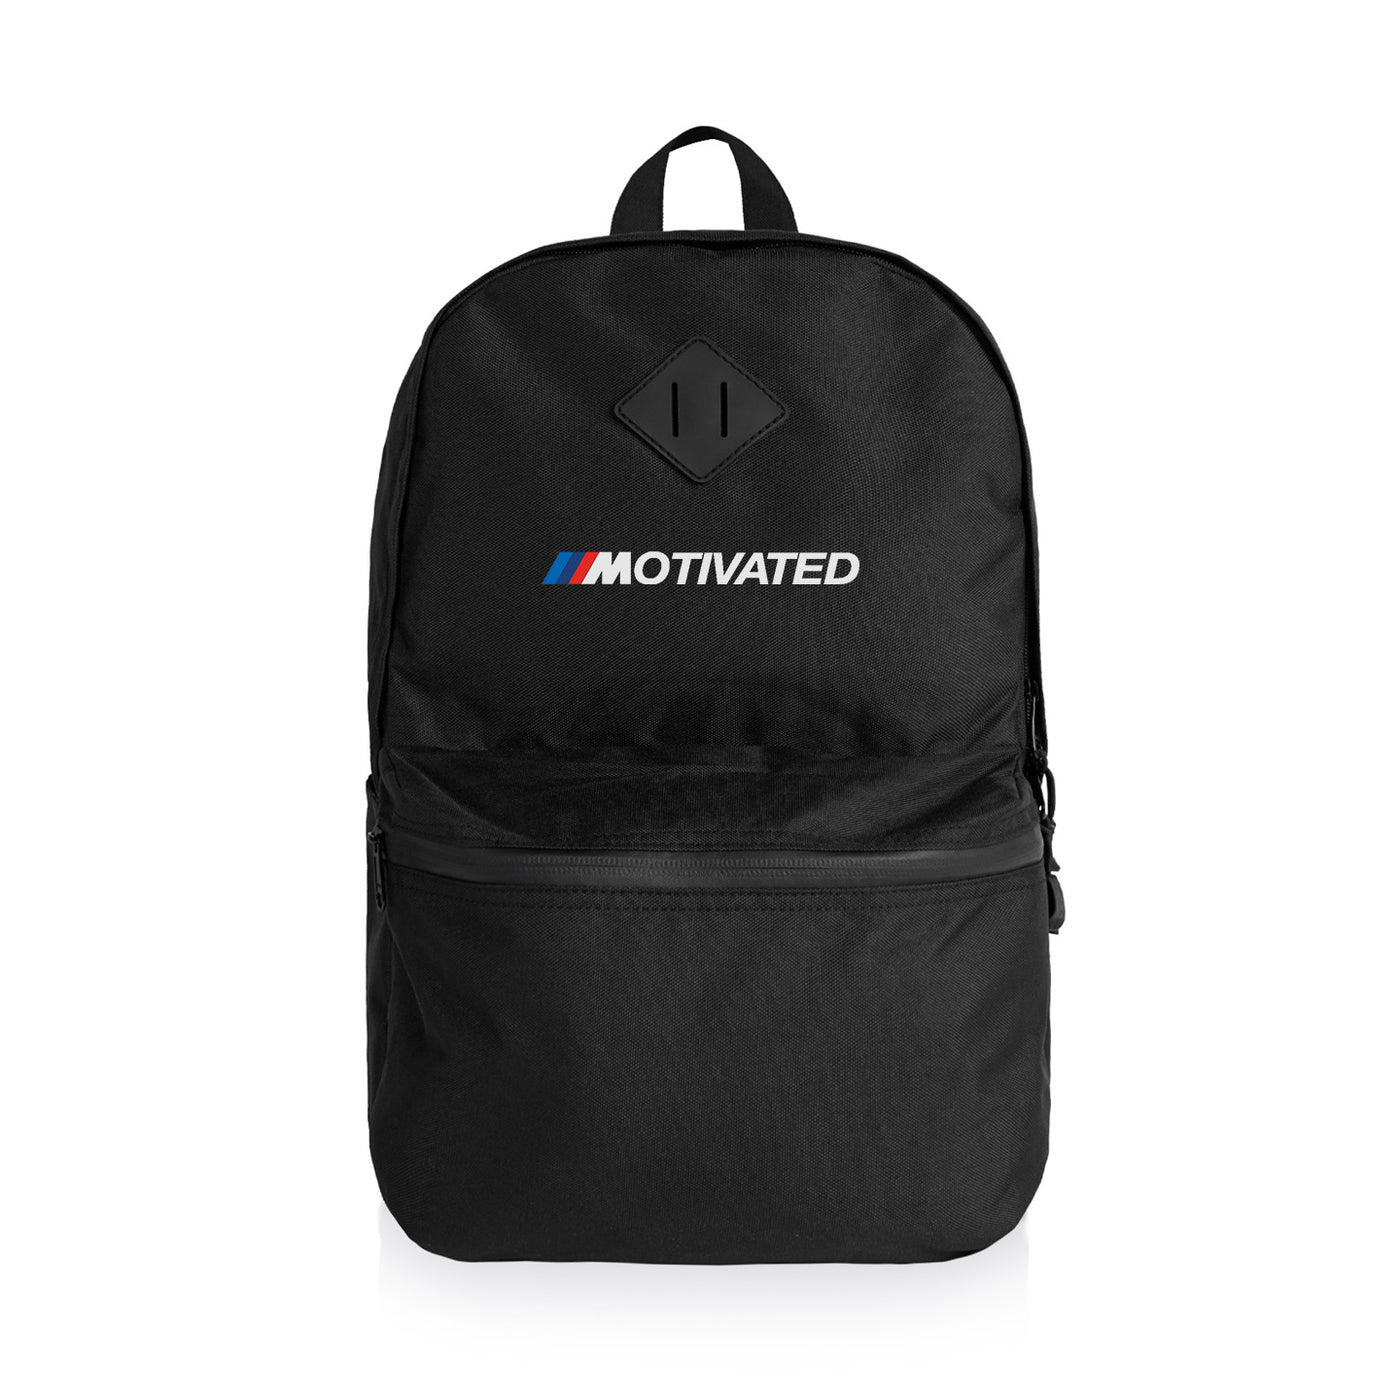 Motivated Backpack